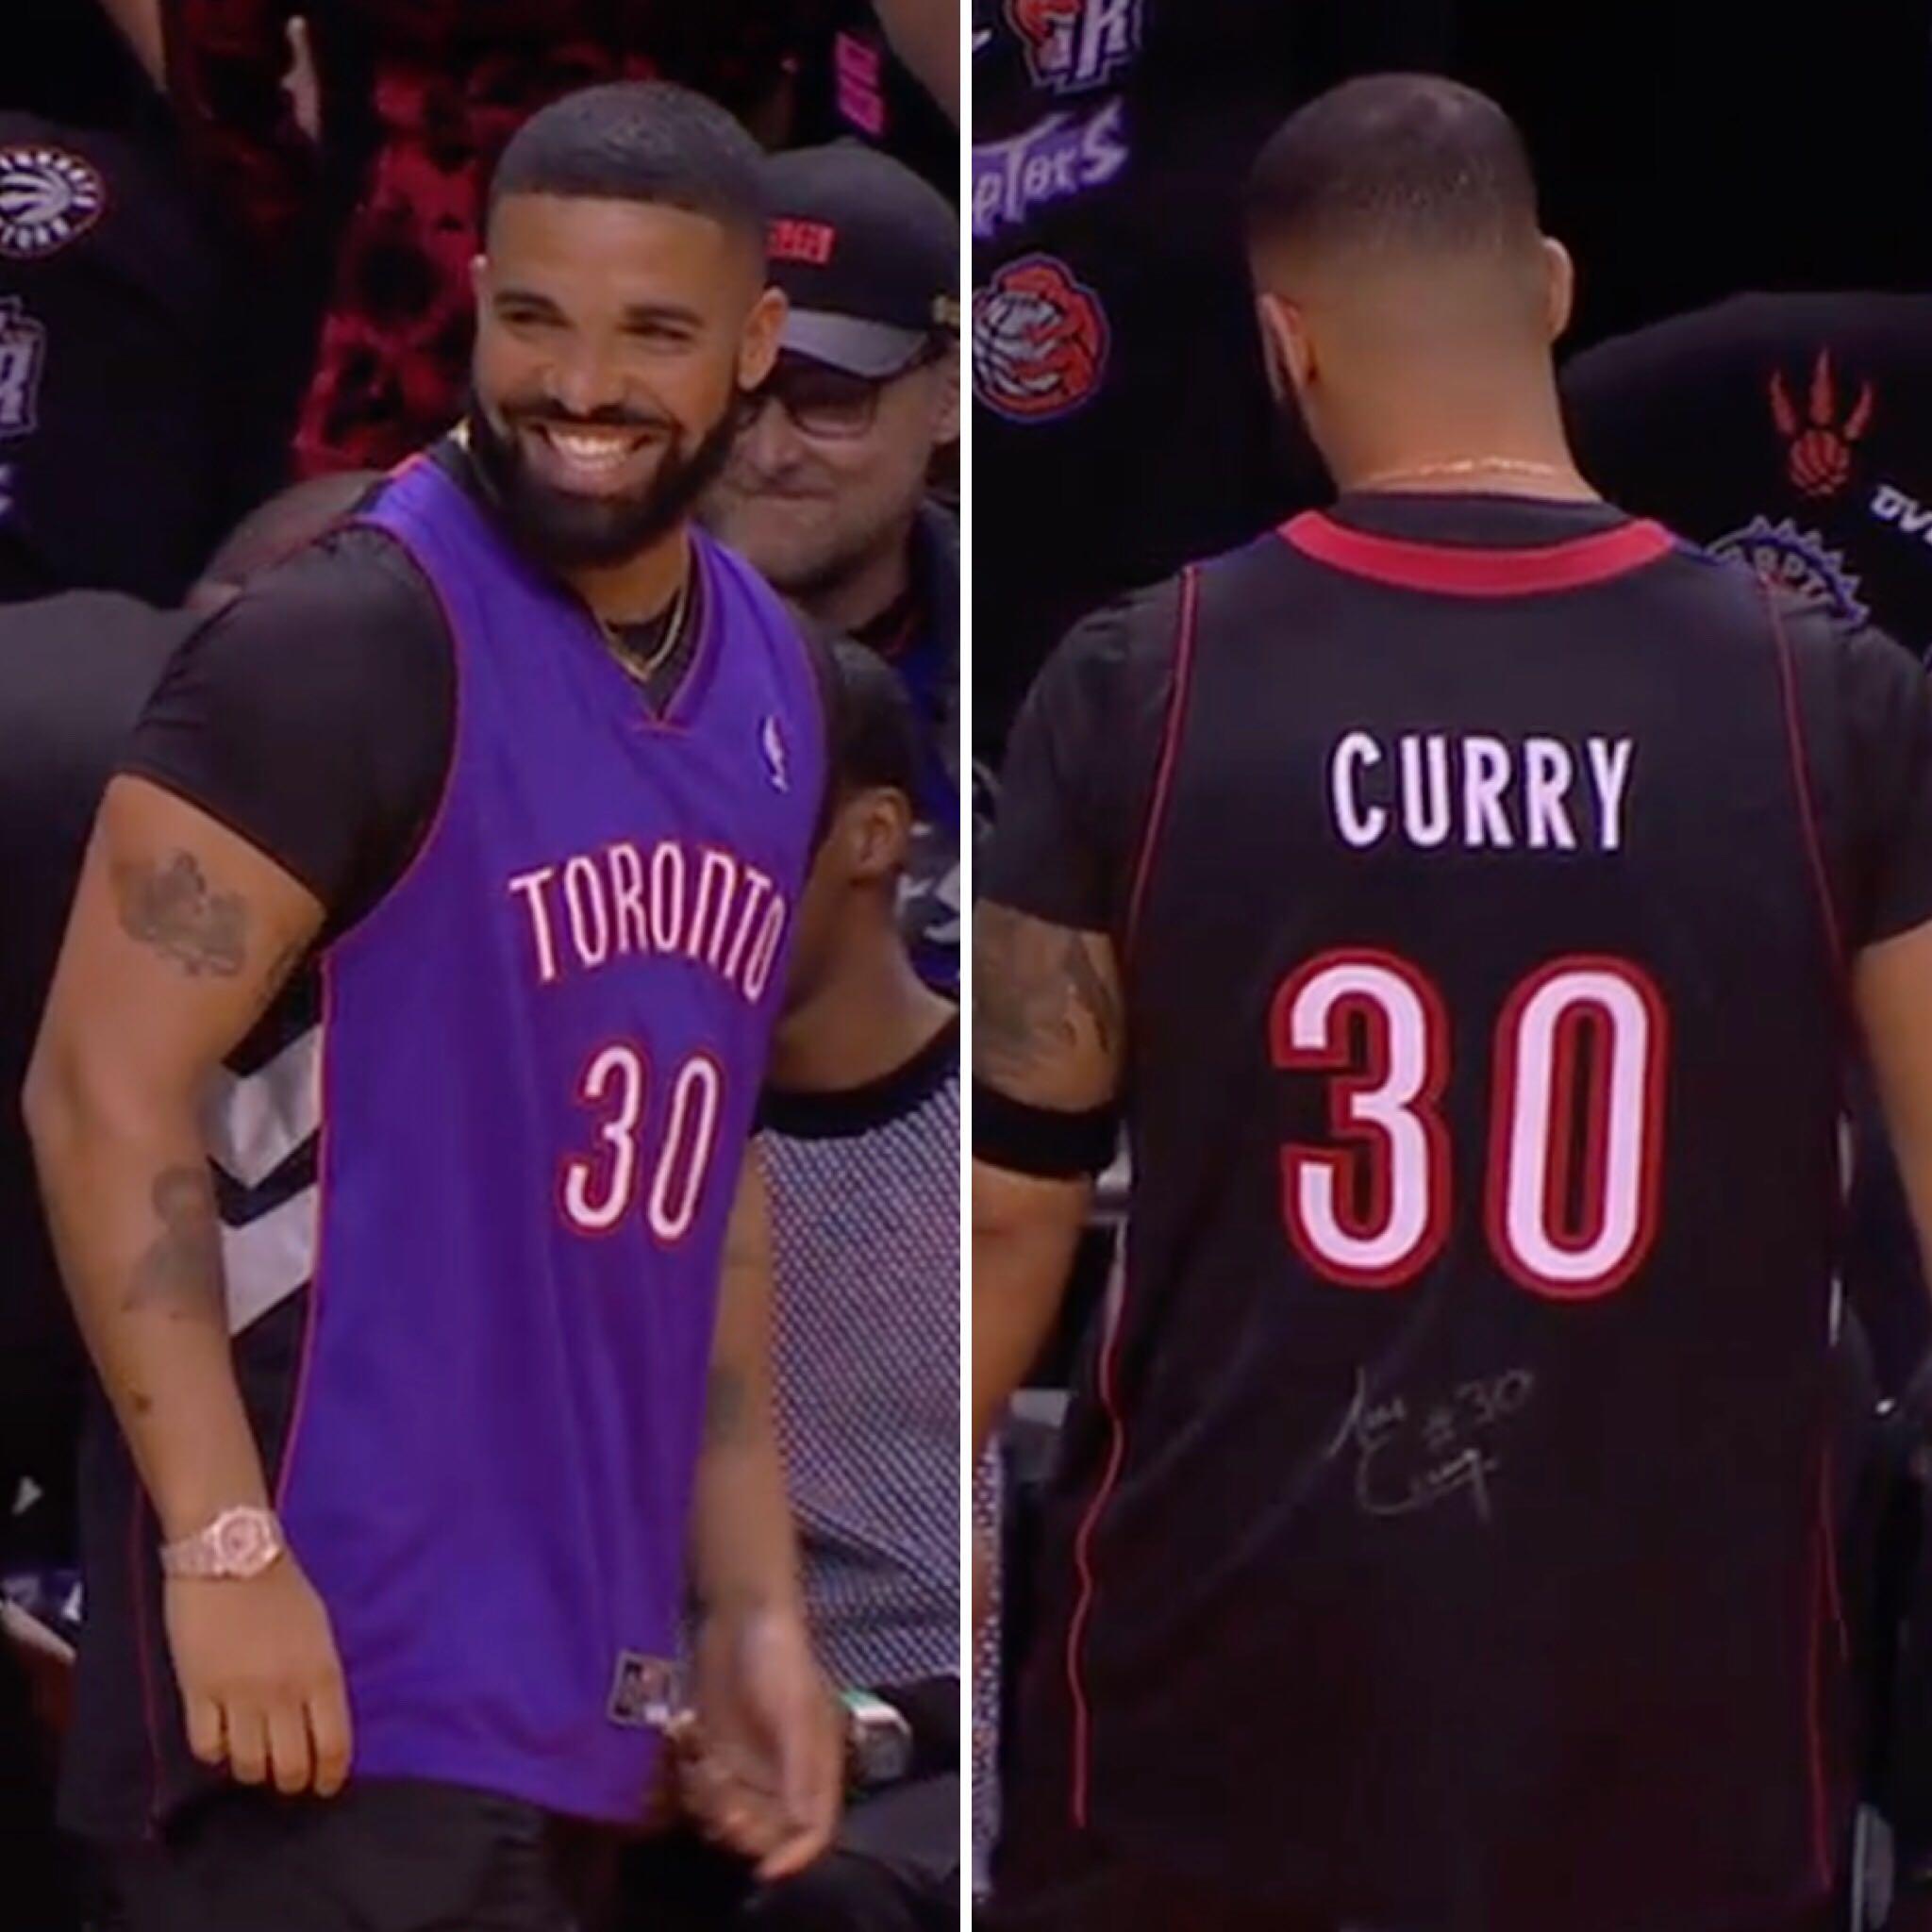 drake in dell curry jersey